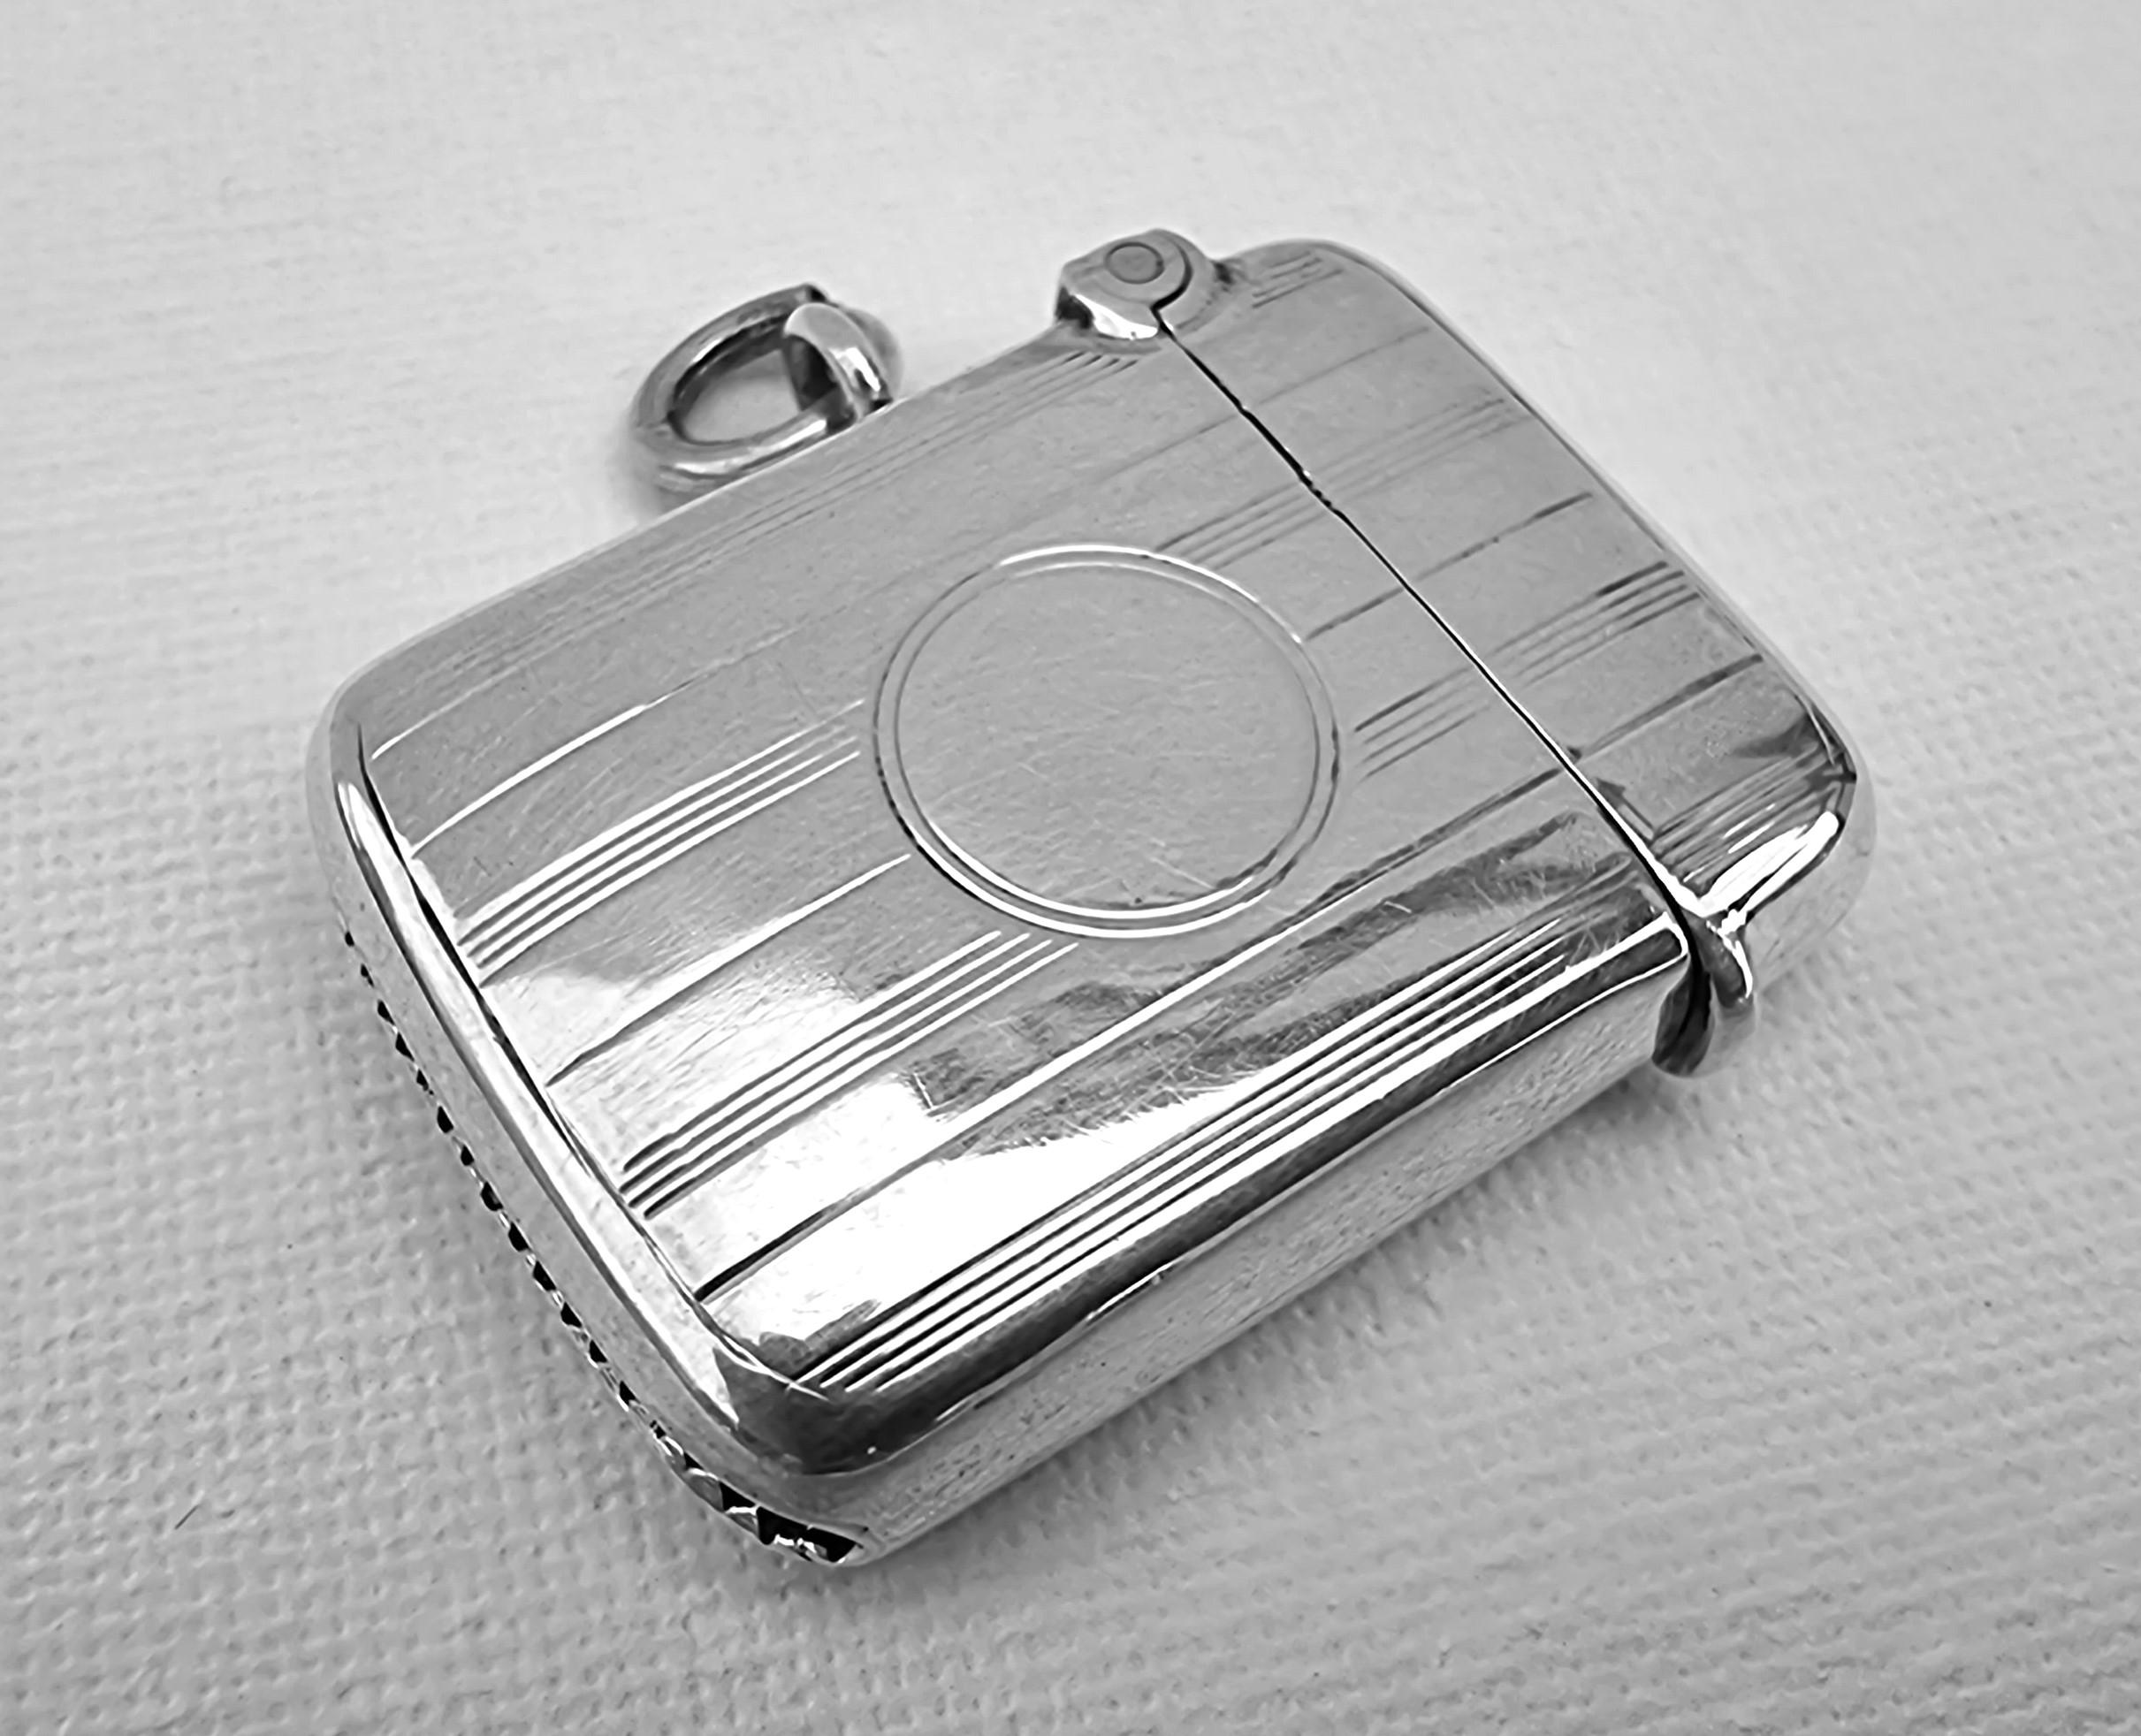 This fine silver vesta case is of an unusual rare small size. It measures Height 3.7cm x width 2.7cm x depth 1cm.  It is a high quality very solidly made example. Hallmarked for Birmingham 1920/21 by the famous silversmith William Hair Haseler.

It